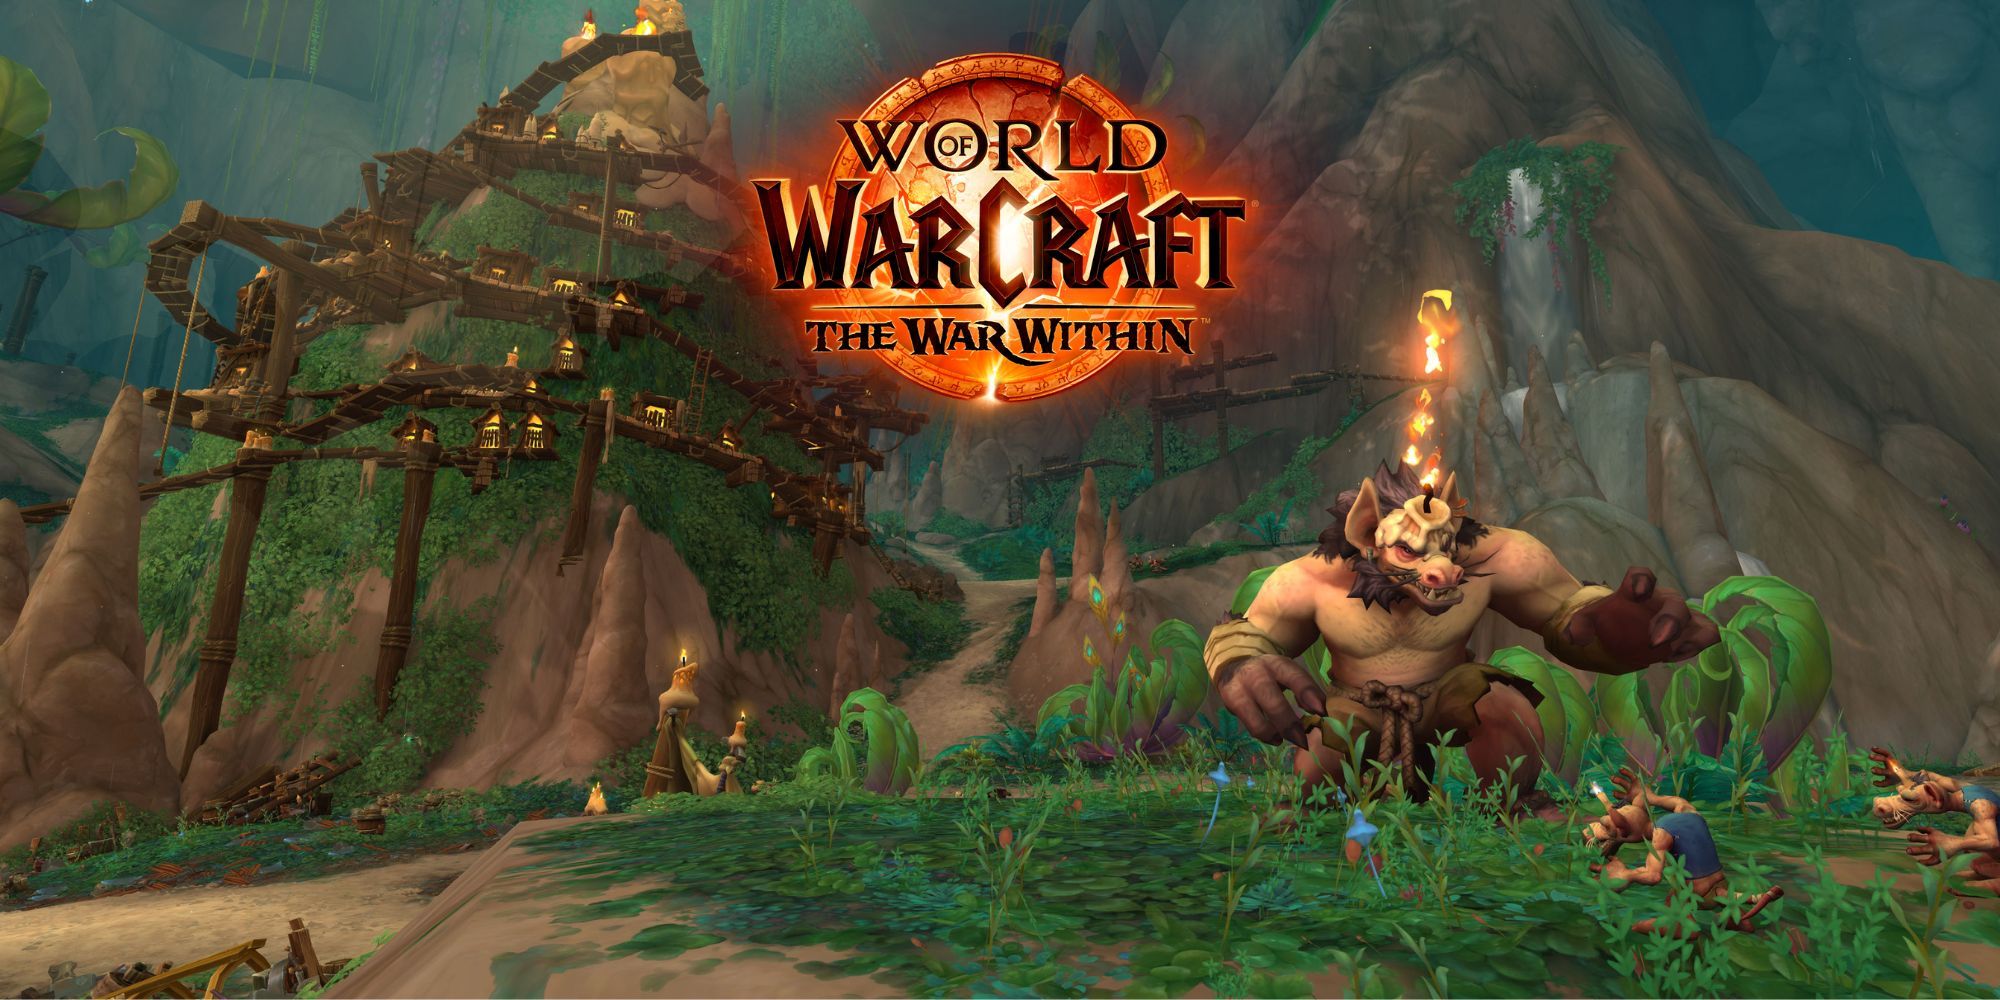 world-of-warcraft-the-war-within-logo-in-front-of-a-screenshot-with-some-kobolds.jpg